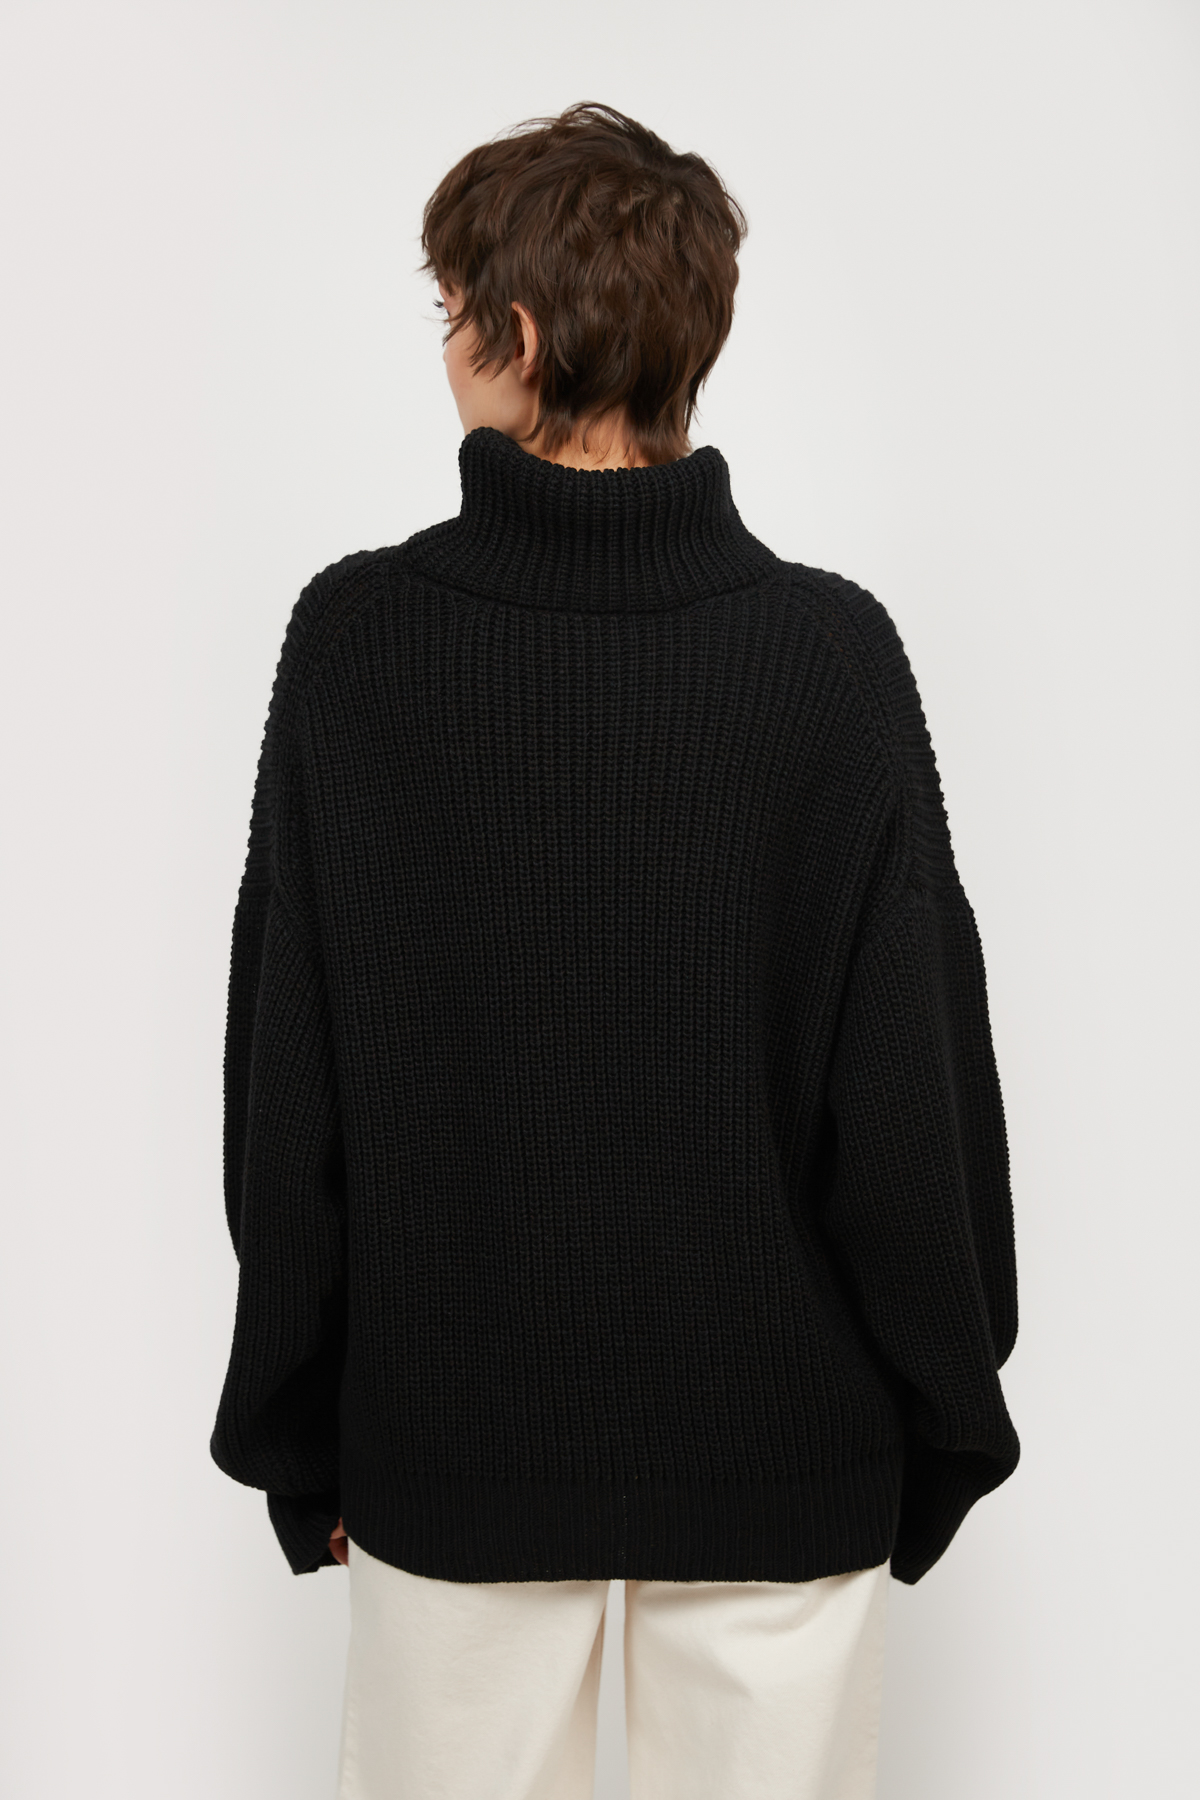 Knitted black sweater with wool, photo 5